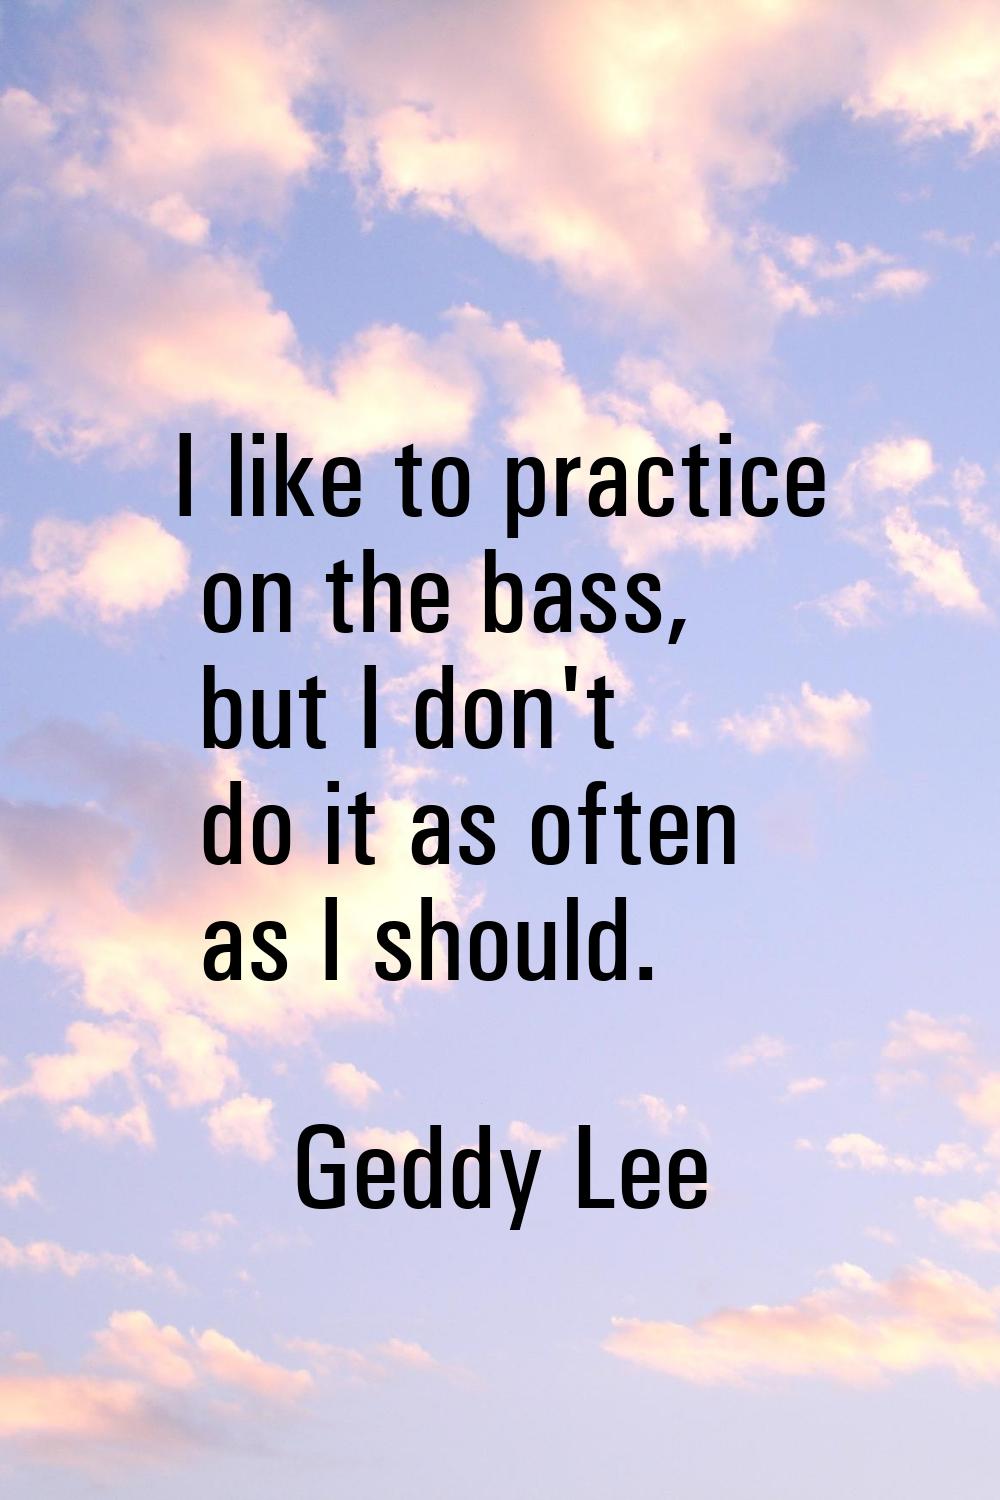 I like to practice on the bass, but I don't do it as often as I should.